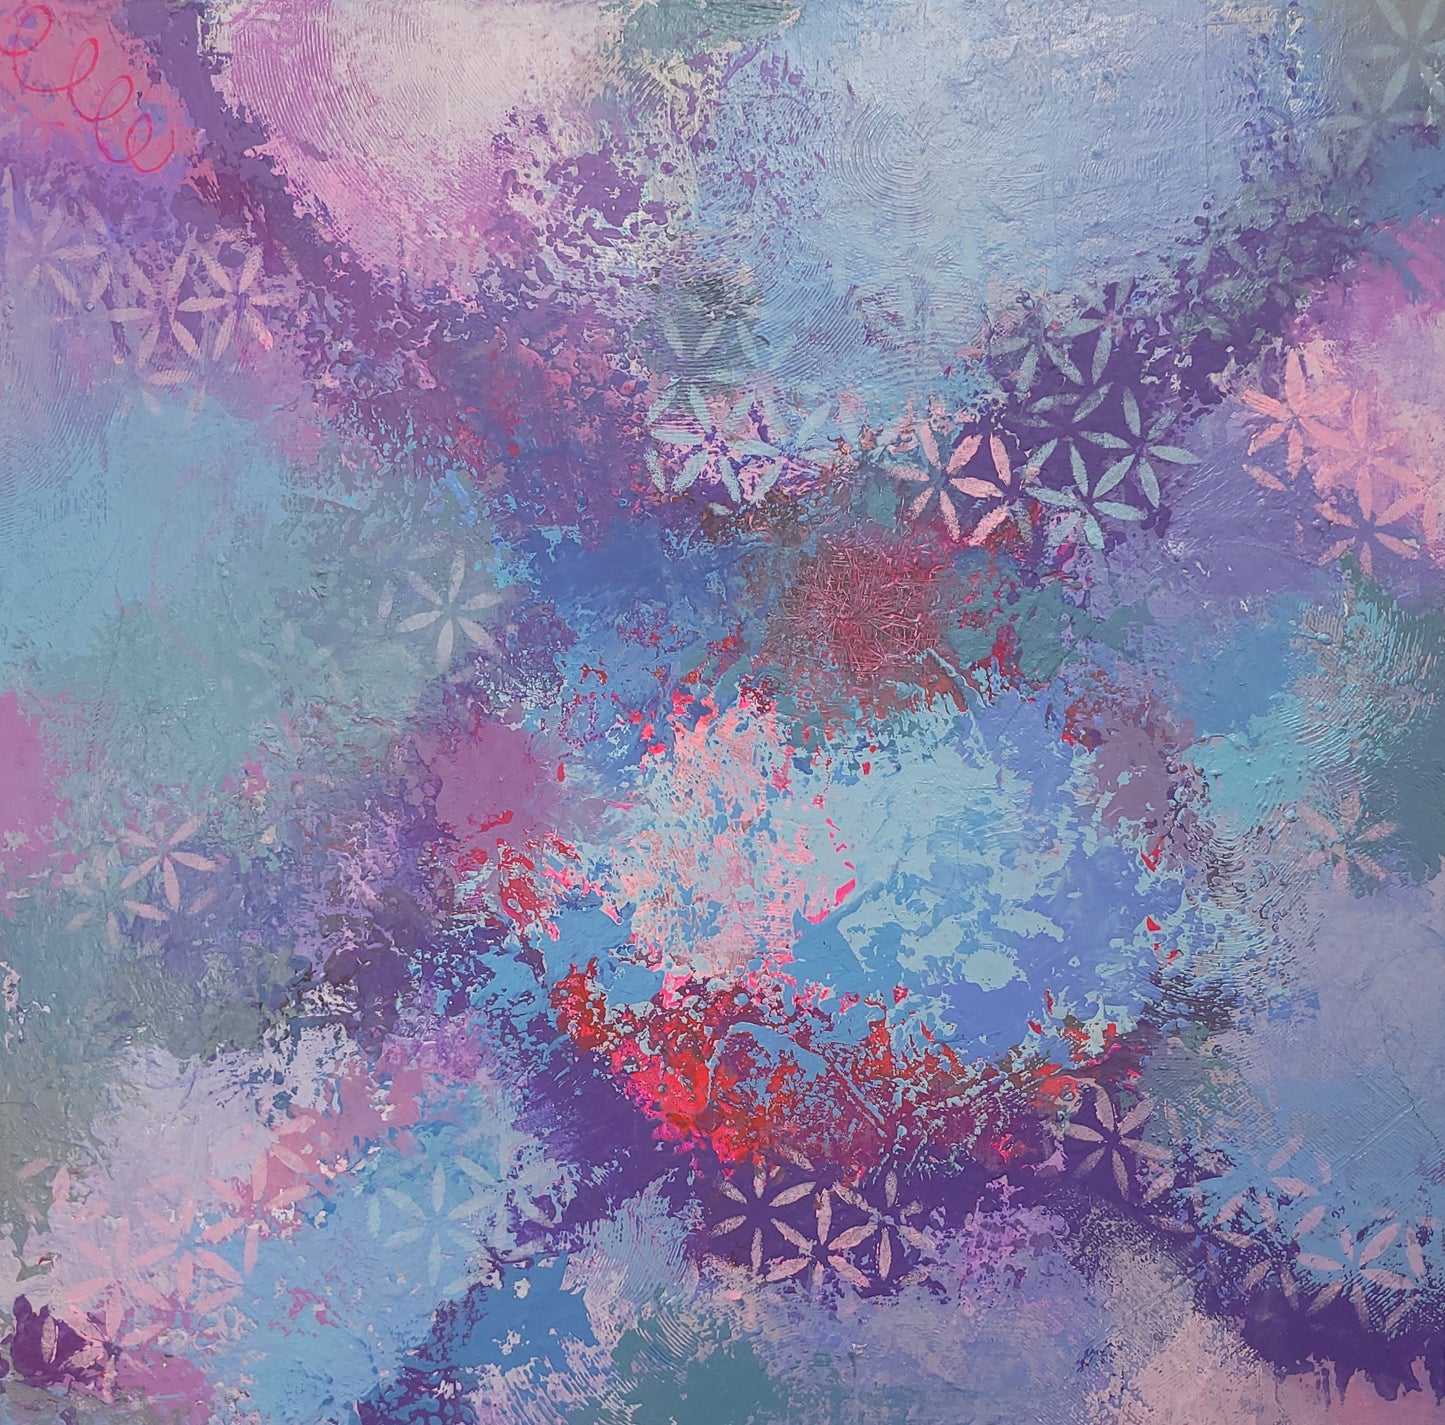 Kaleidoscope is the 6th painting in the Embracing the Journey limited-palette series. It features multiple textures, marks, tints, and shades of red, green, blue, pink, and purple with stenciled flowers. 20" x 20" x 1.5" Acrylic on gallery-wrapped canvas